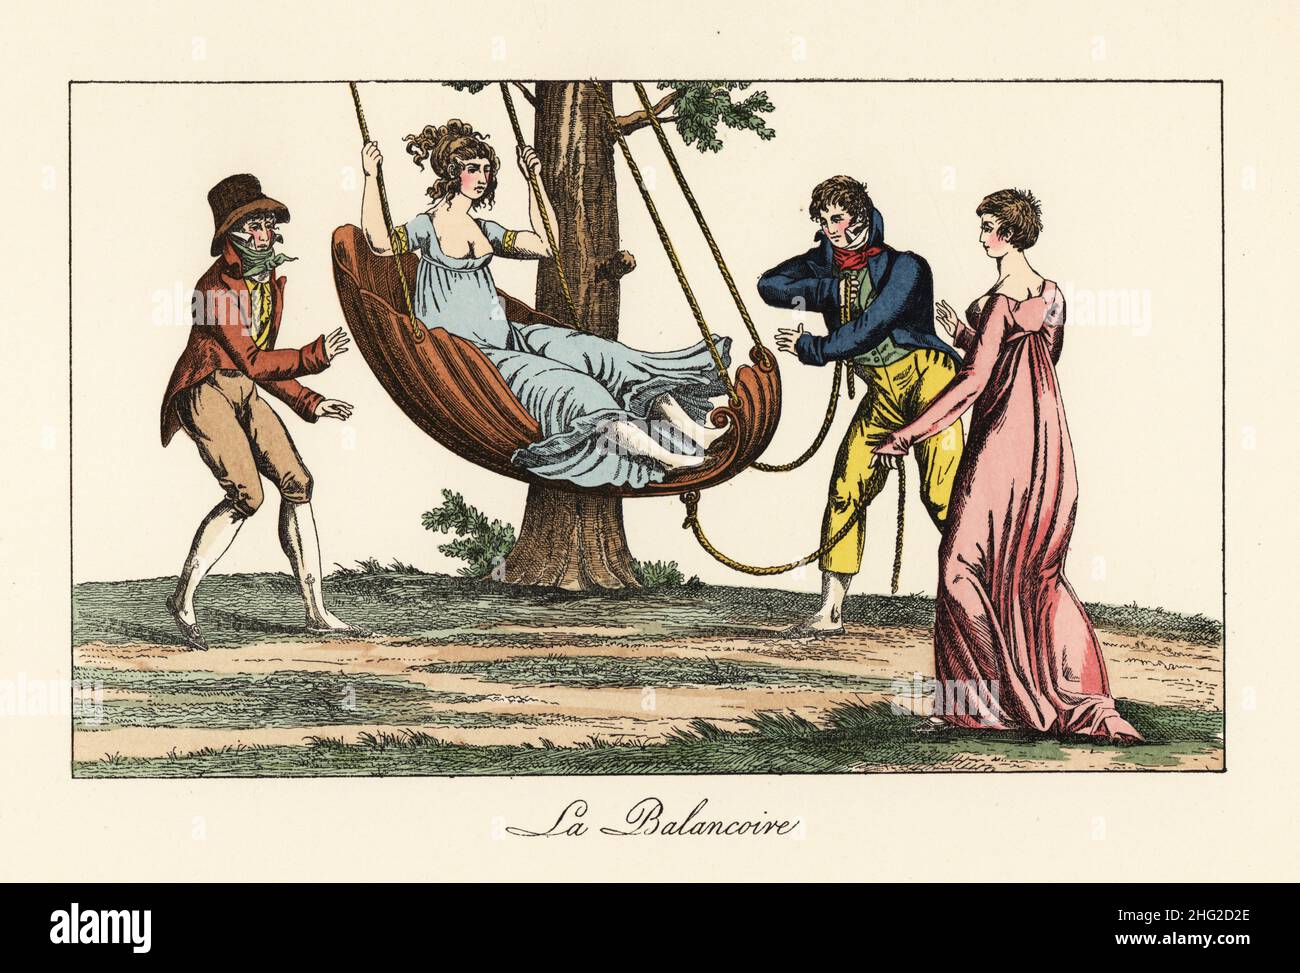 Merveilleuse in a scallop-shell swing under a tree, Paris, Directoire era. An Incroyable pushes her from behind while a couple pull with ropes One woman has a short hairstyle, as la Titus or a la Victime. La Balancoire. From a satirical print in Pierre de la Mesangere's le Bon Genre, 1800s. Handcoloured lithograph from Henry Rene d’Allemagne’s Recreations et Passe-Temps, Games and Pastimes, Hachette, Paris, 1906. Stock Photo